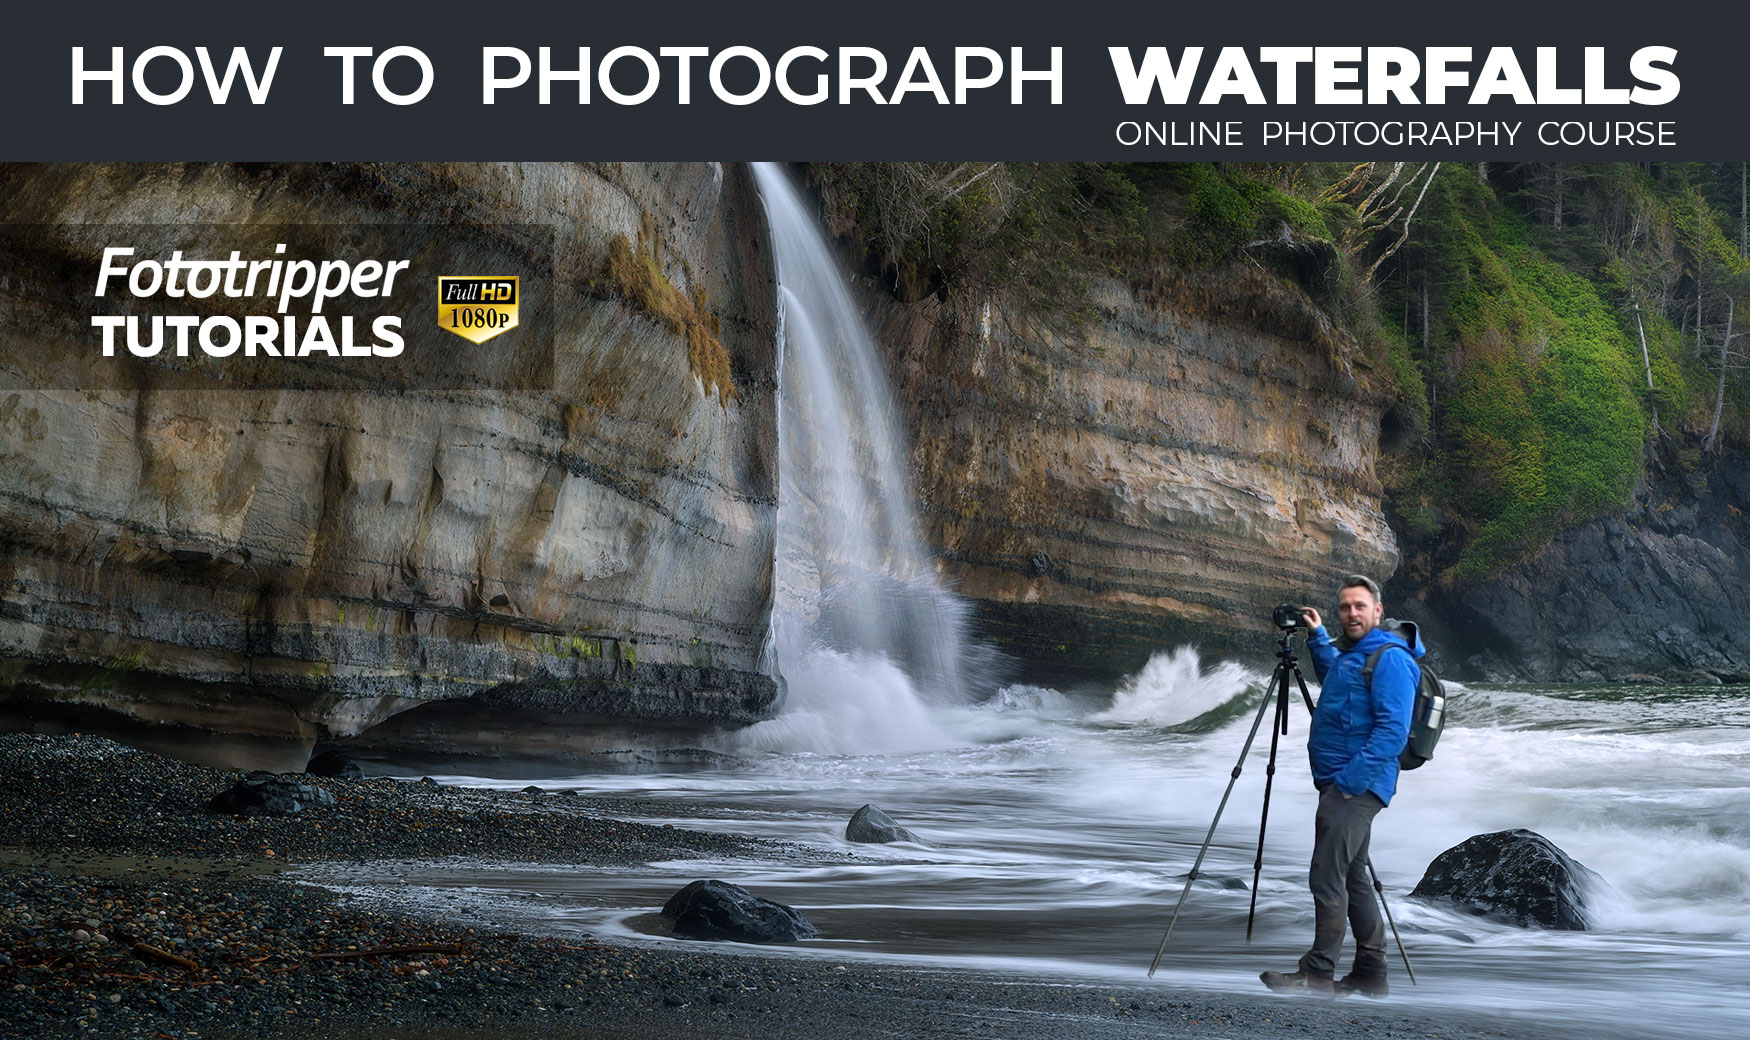 How to Photograph Waterfalls - Online Photography Course